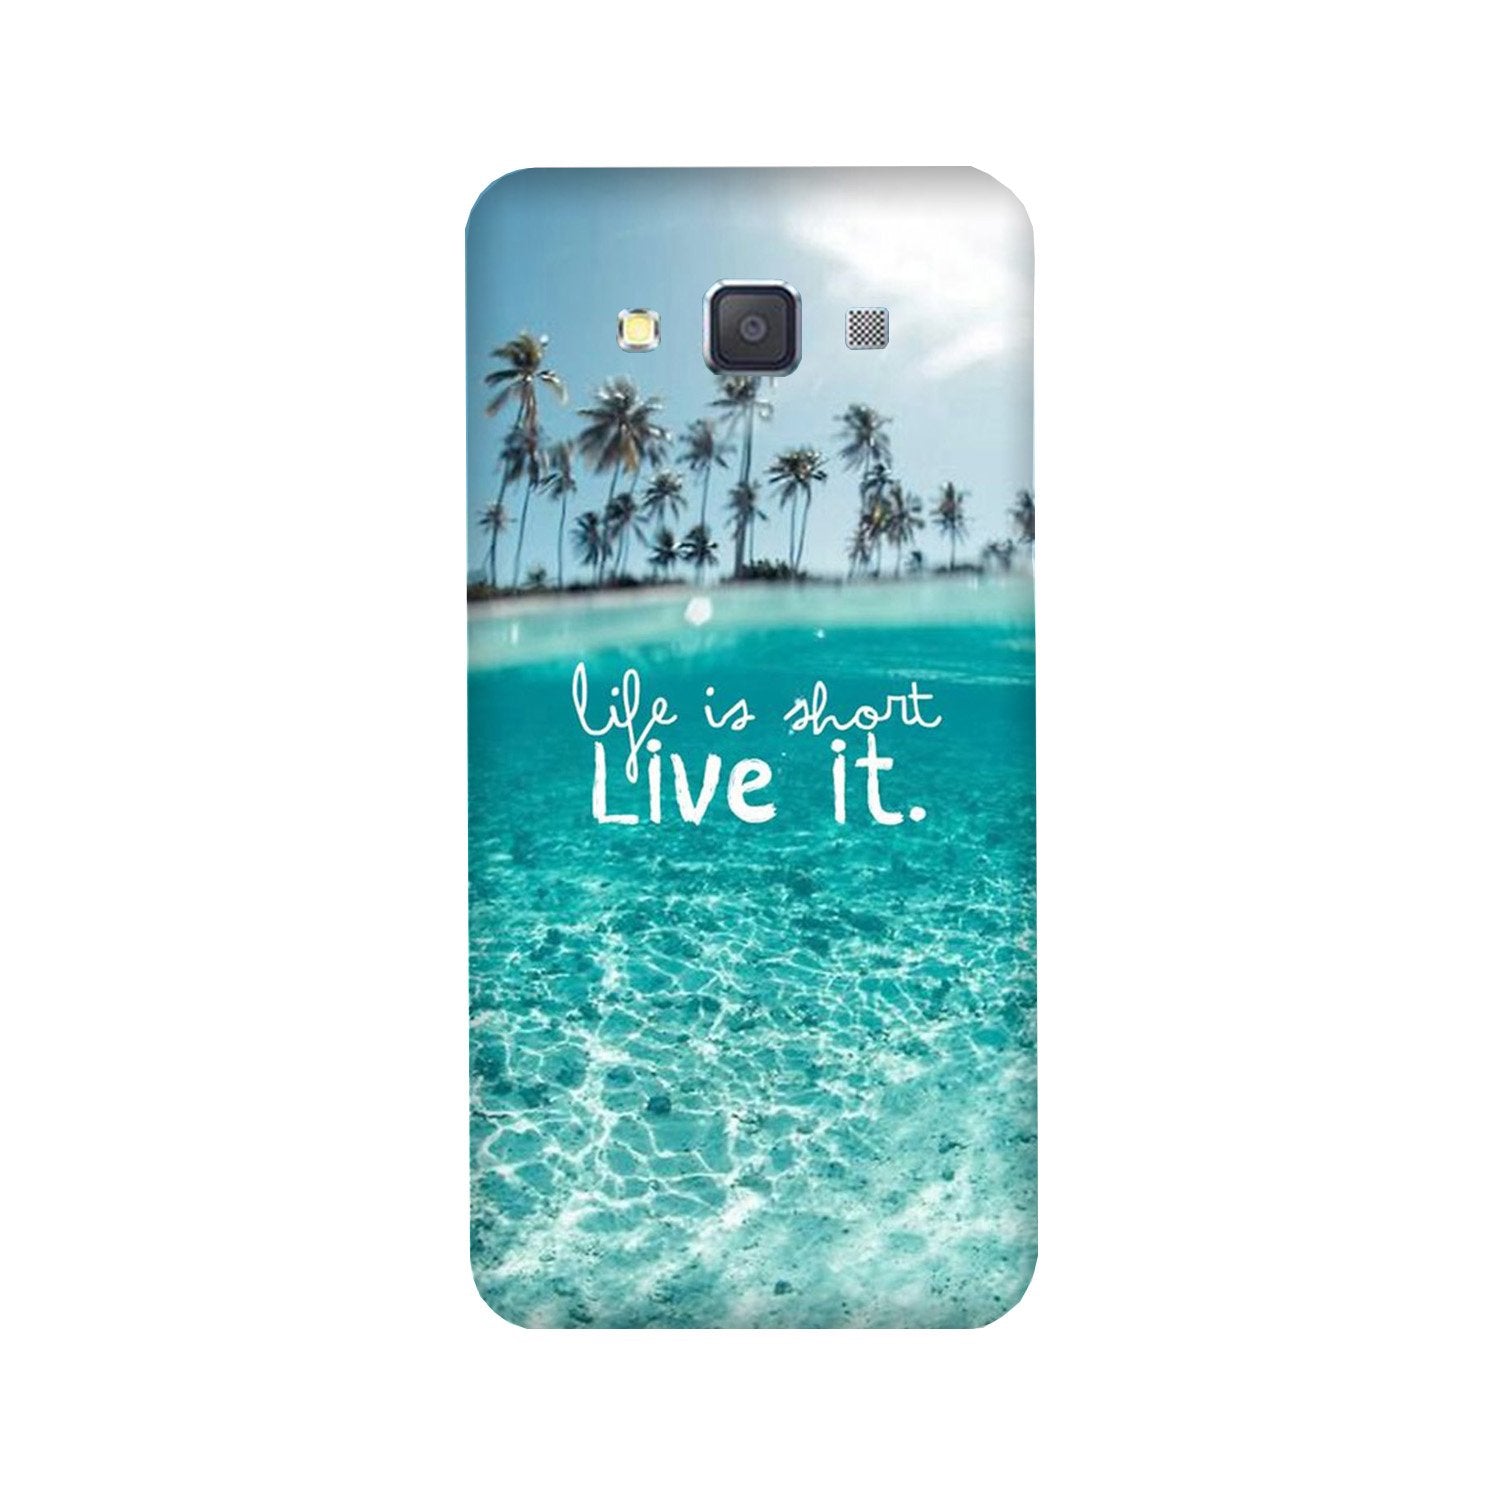 Life is short live it Case for Galaxy E7